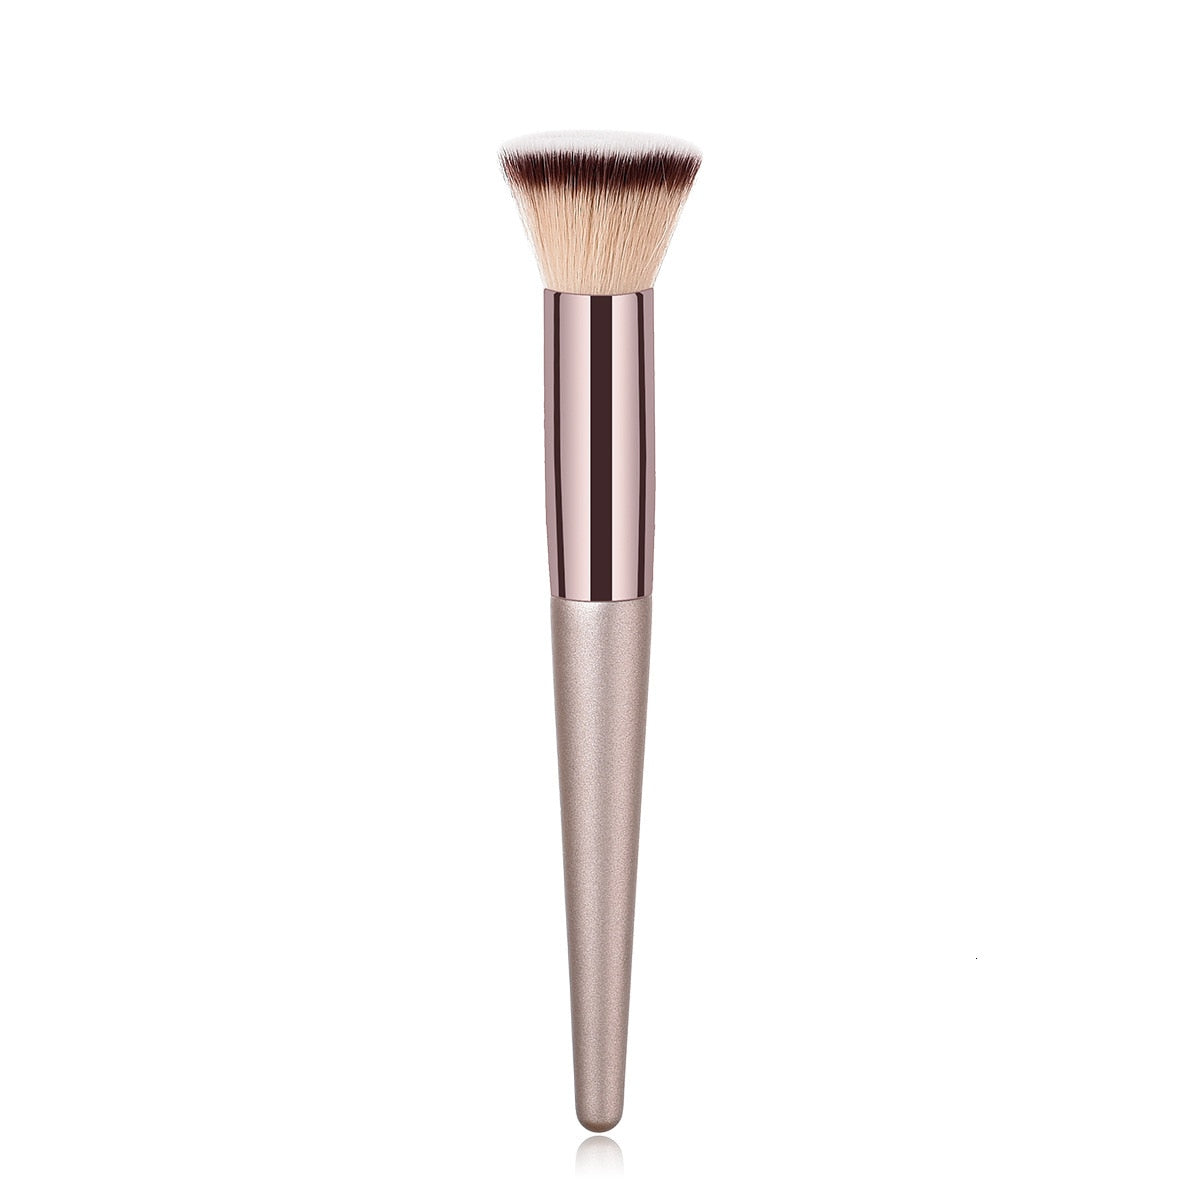 Brushes Champagne Makeup Concealer - SixtyKey new model design Dubai fashion style 2021 best price